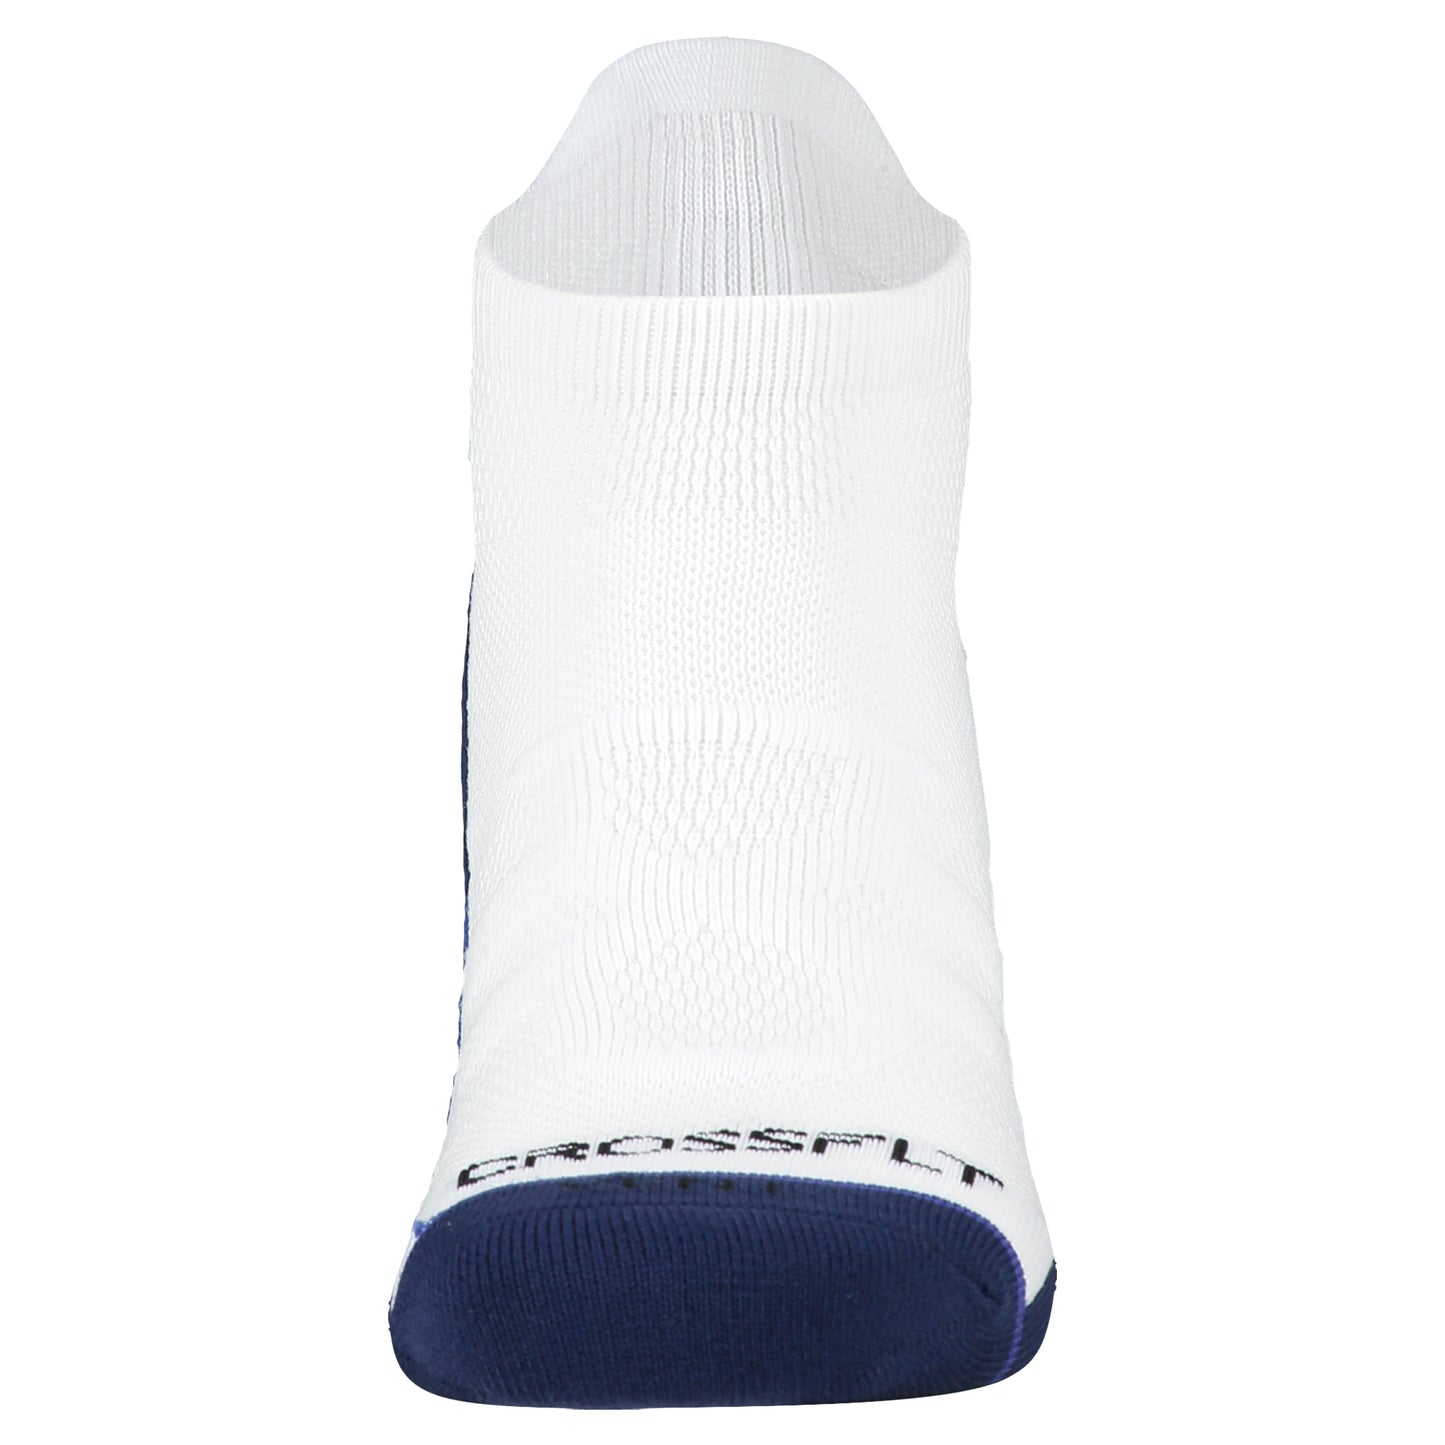 Crossfly men's Vent Low Socks in white / navy from the Performance series, featuring AirVent and AirBeams.